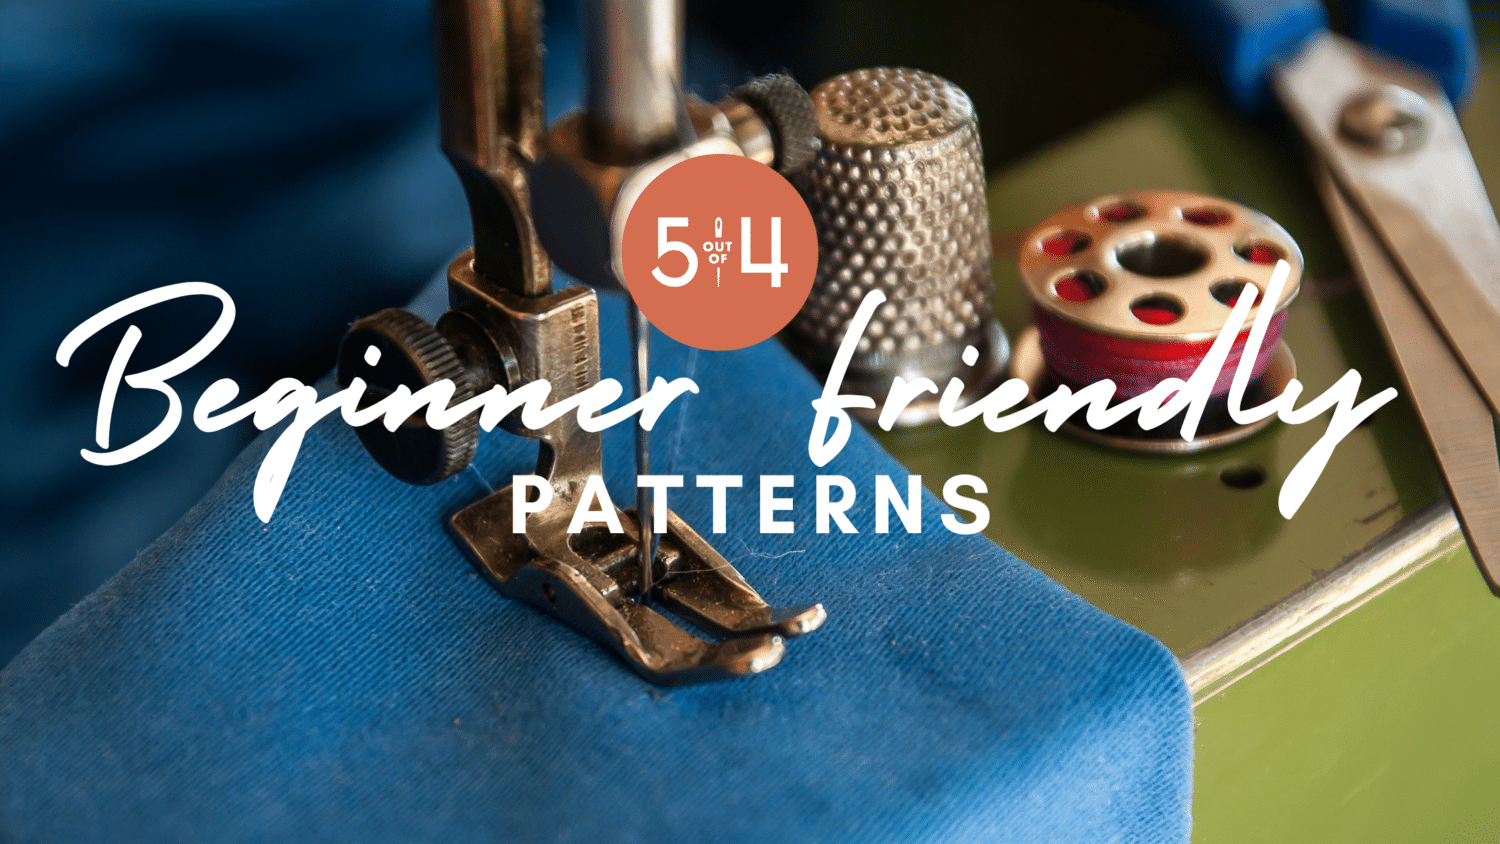 Beginner Friendly 5oo4 Patterns - 5 out of 4 Patterns